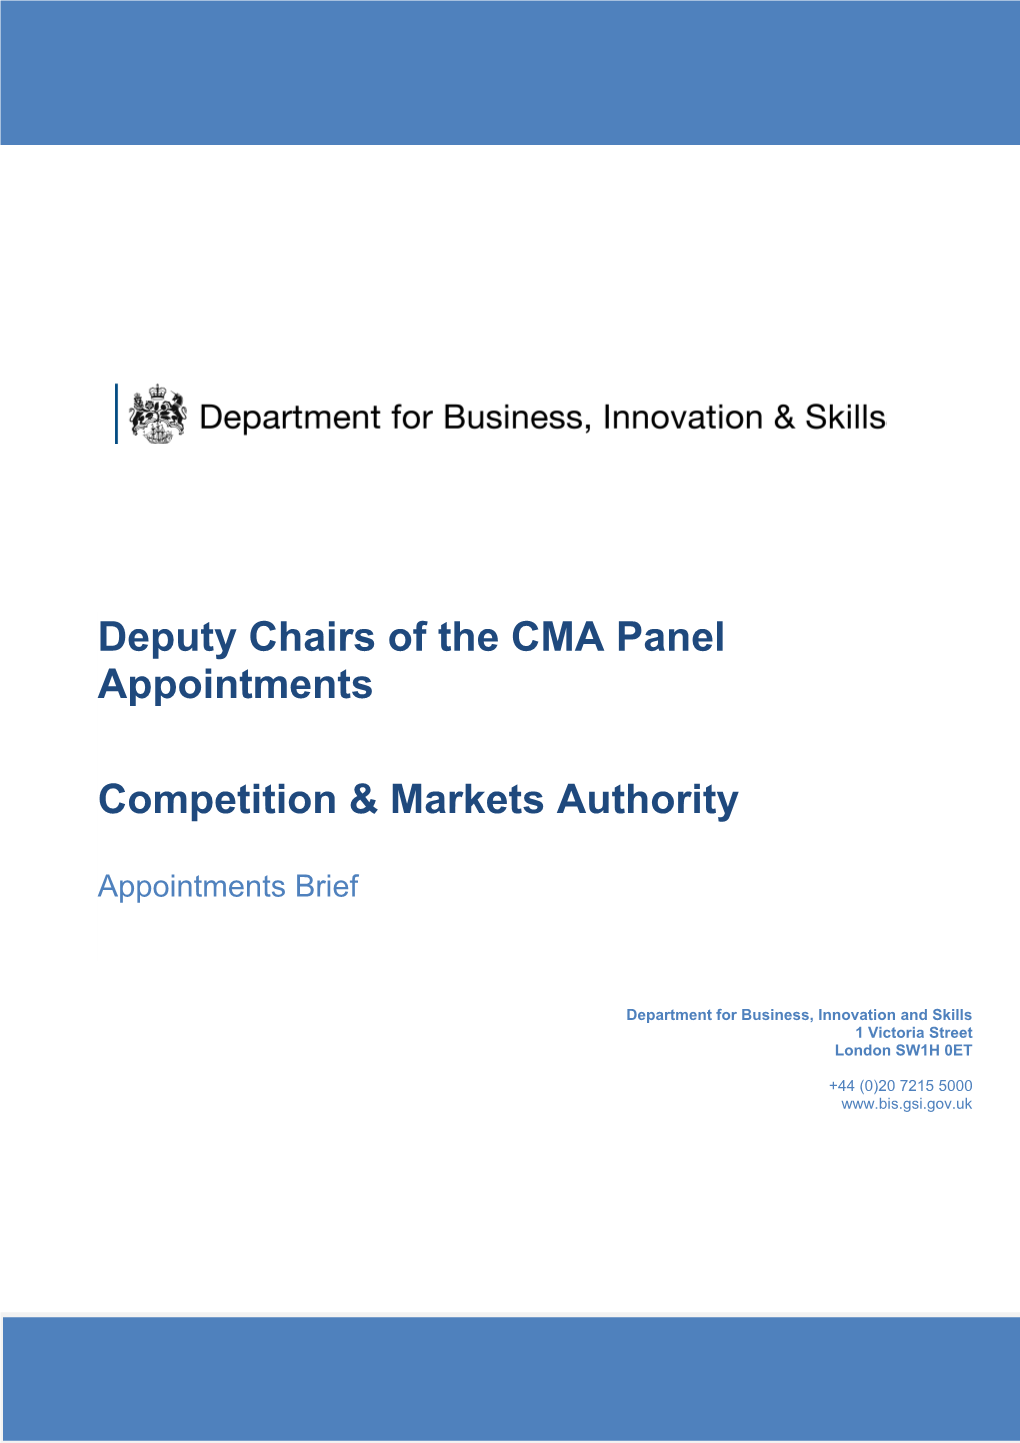 Competition & Markets Authority Appointment of Deputy Chairs of the CMA Panel